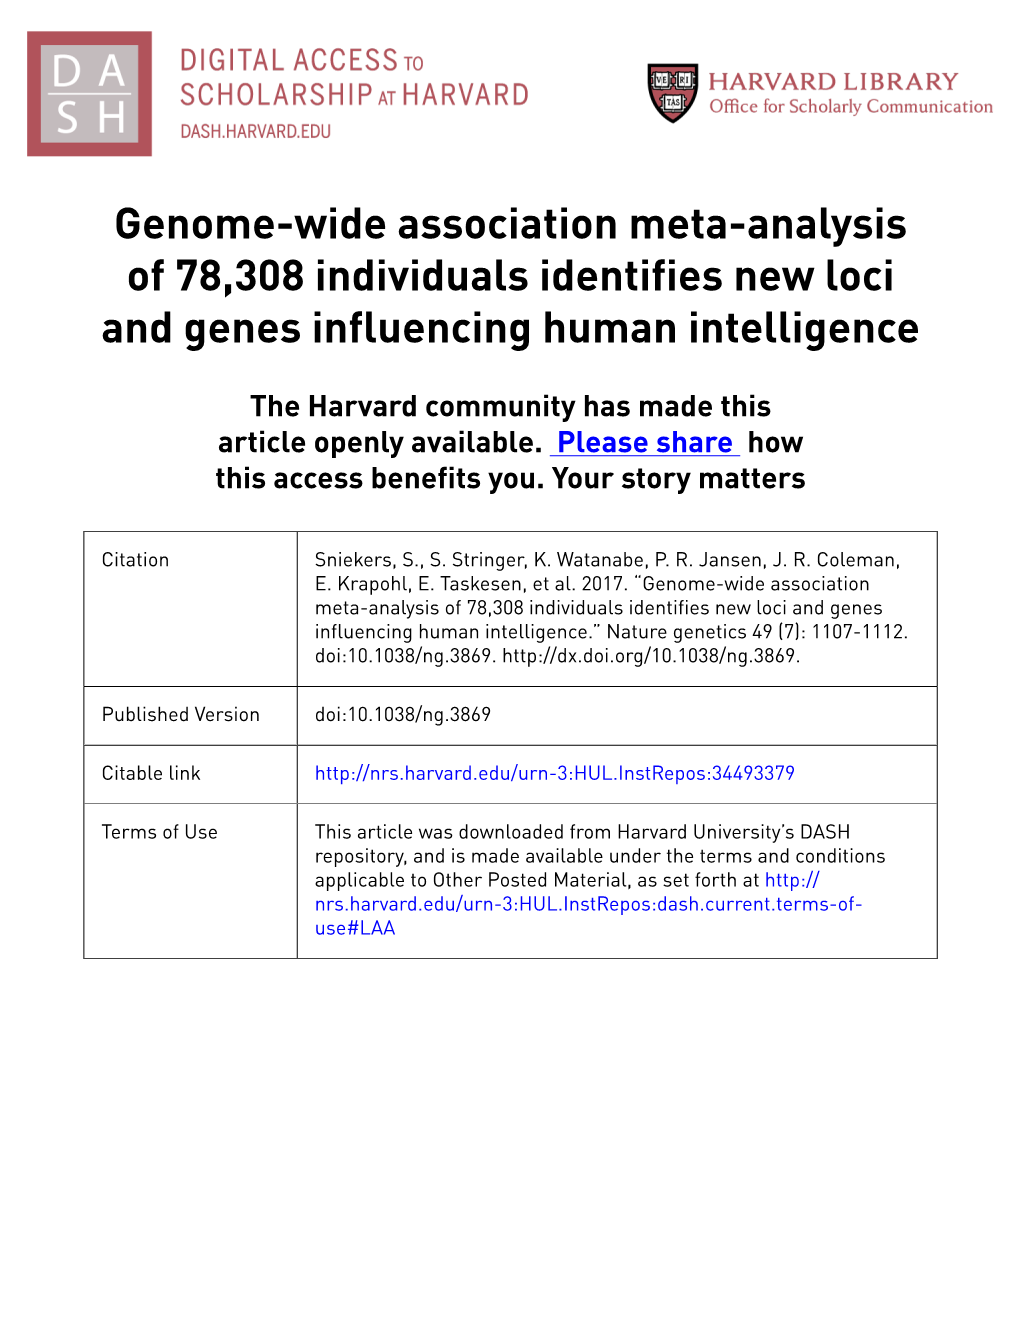 Genome-Wide Association Meta-Analysis of 78,308 Individuals Identifies New Loci and Genes Influencing Human Intelligence